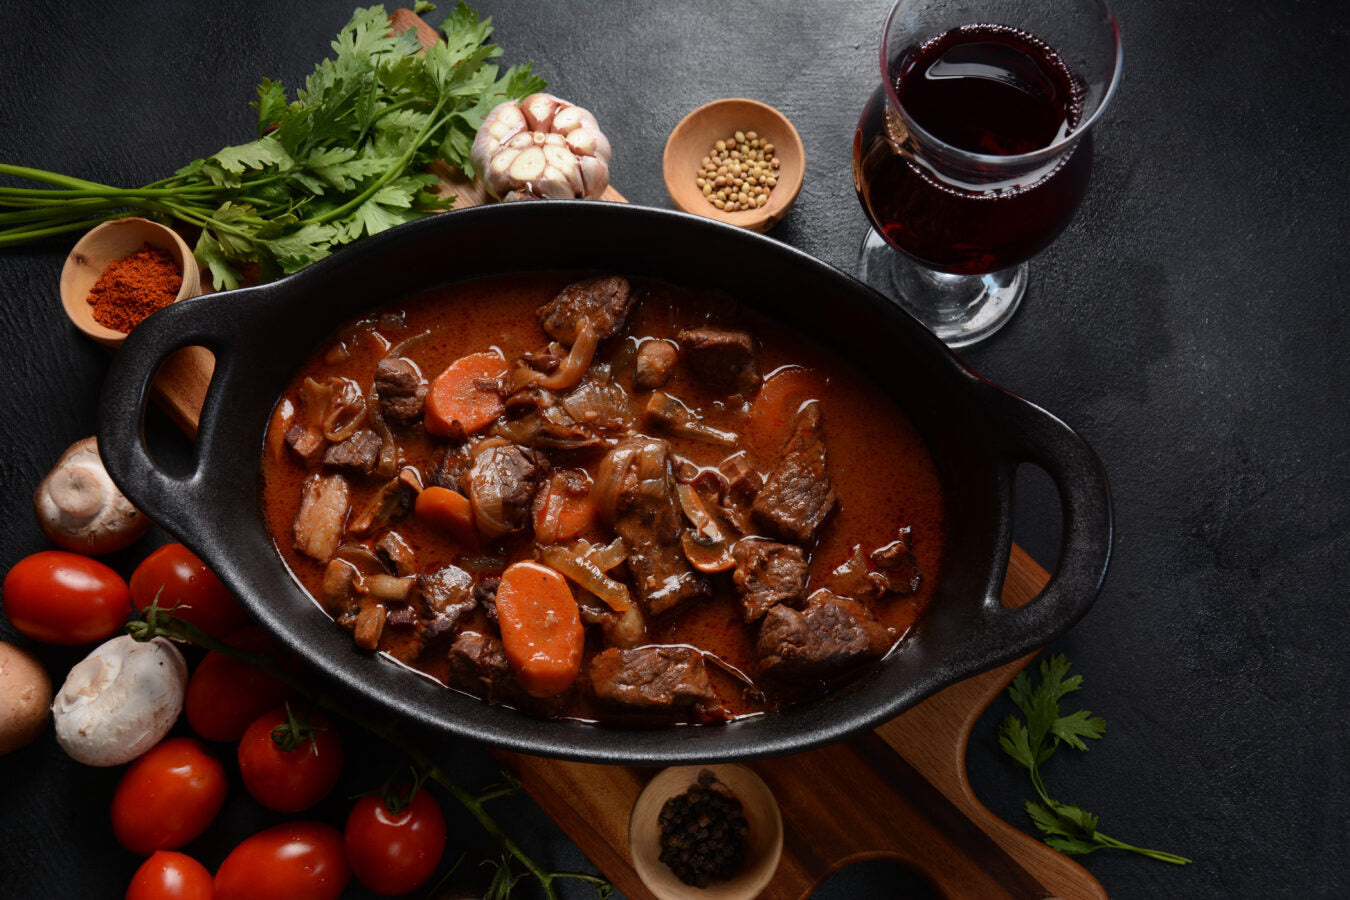 Stew soup and wine pairing